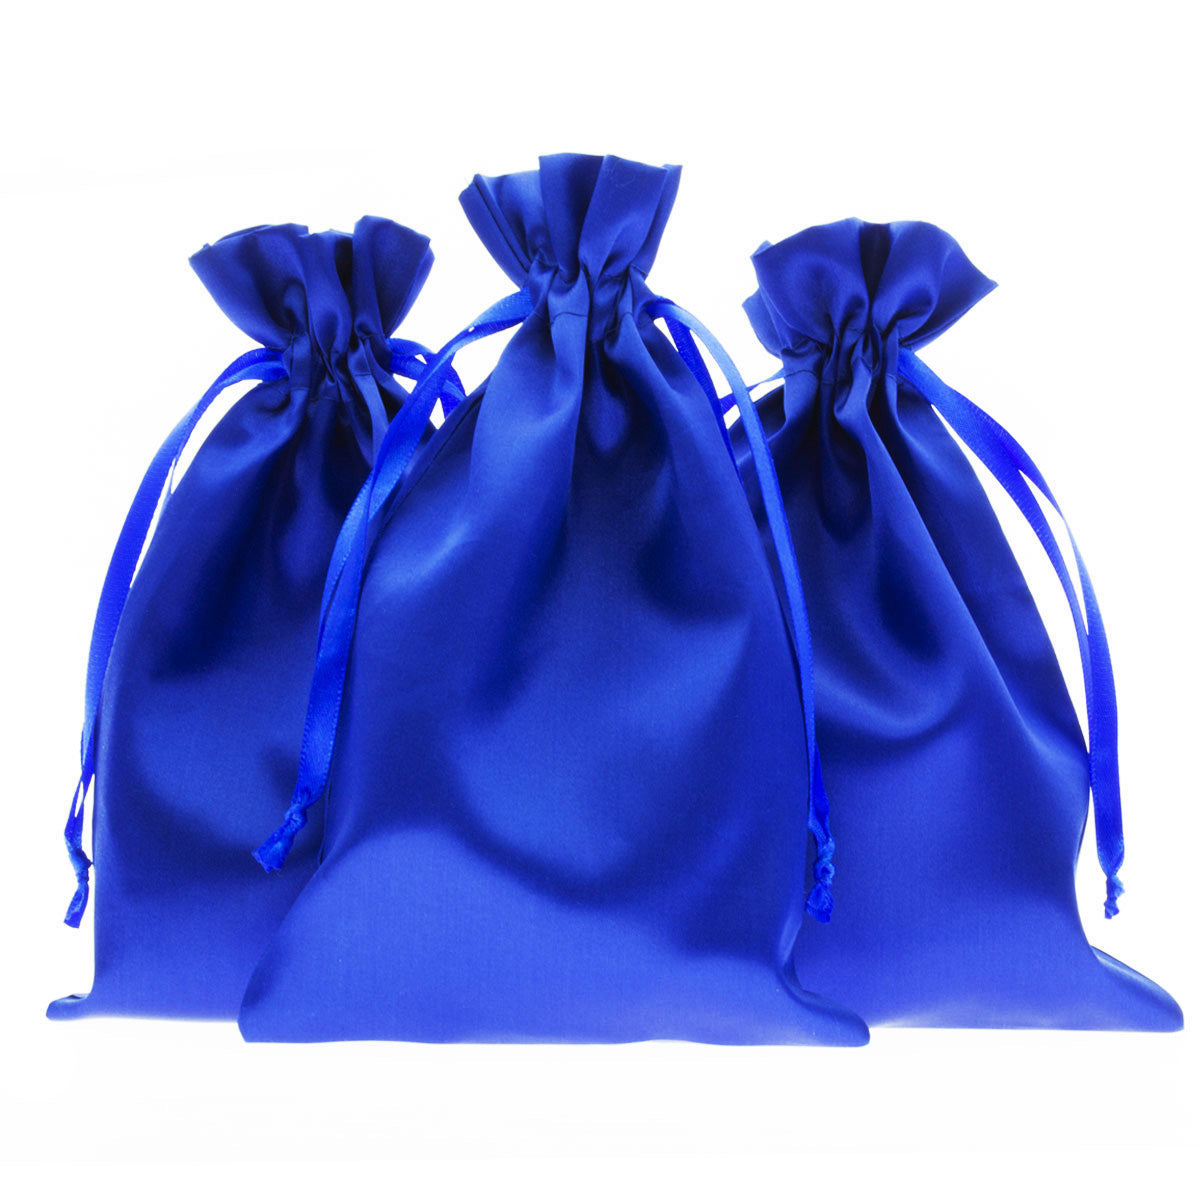 Knitial Brand Blue Satin Bags Set of 50